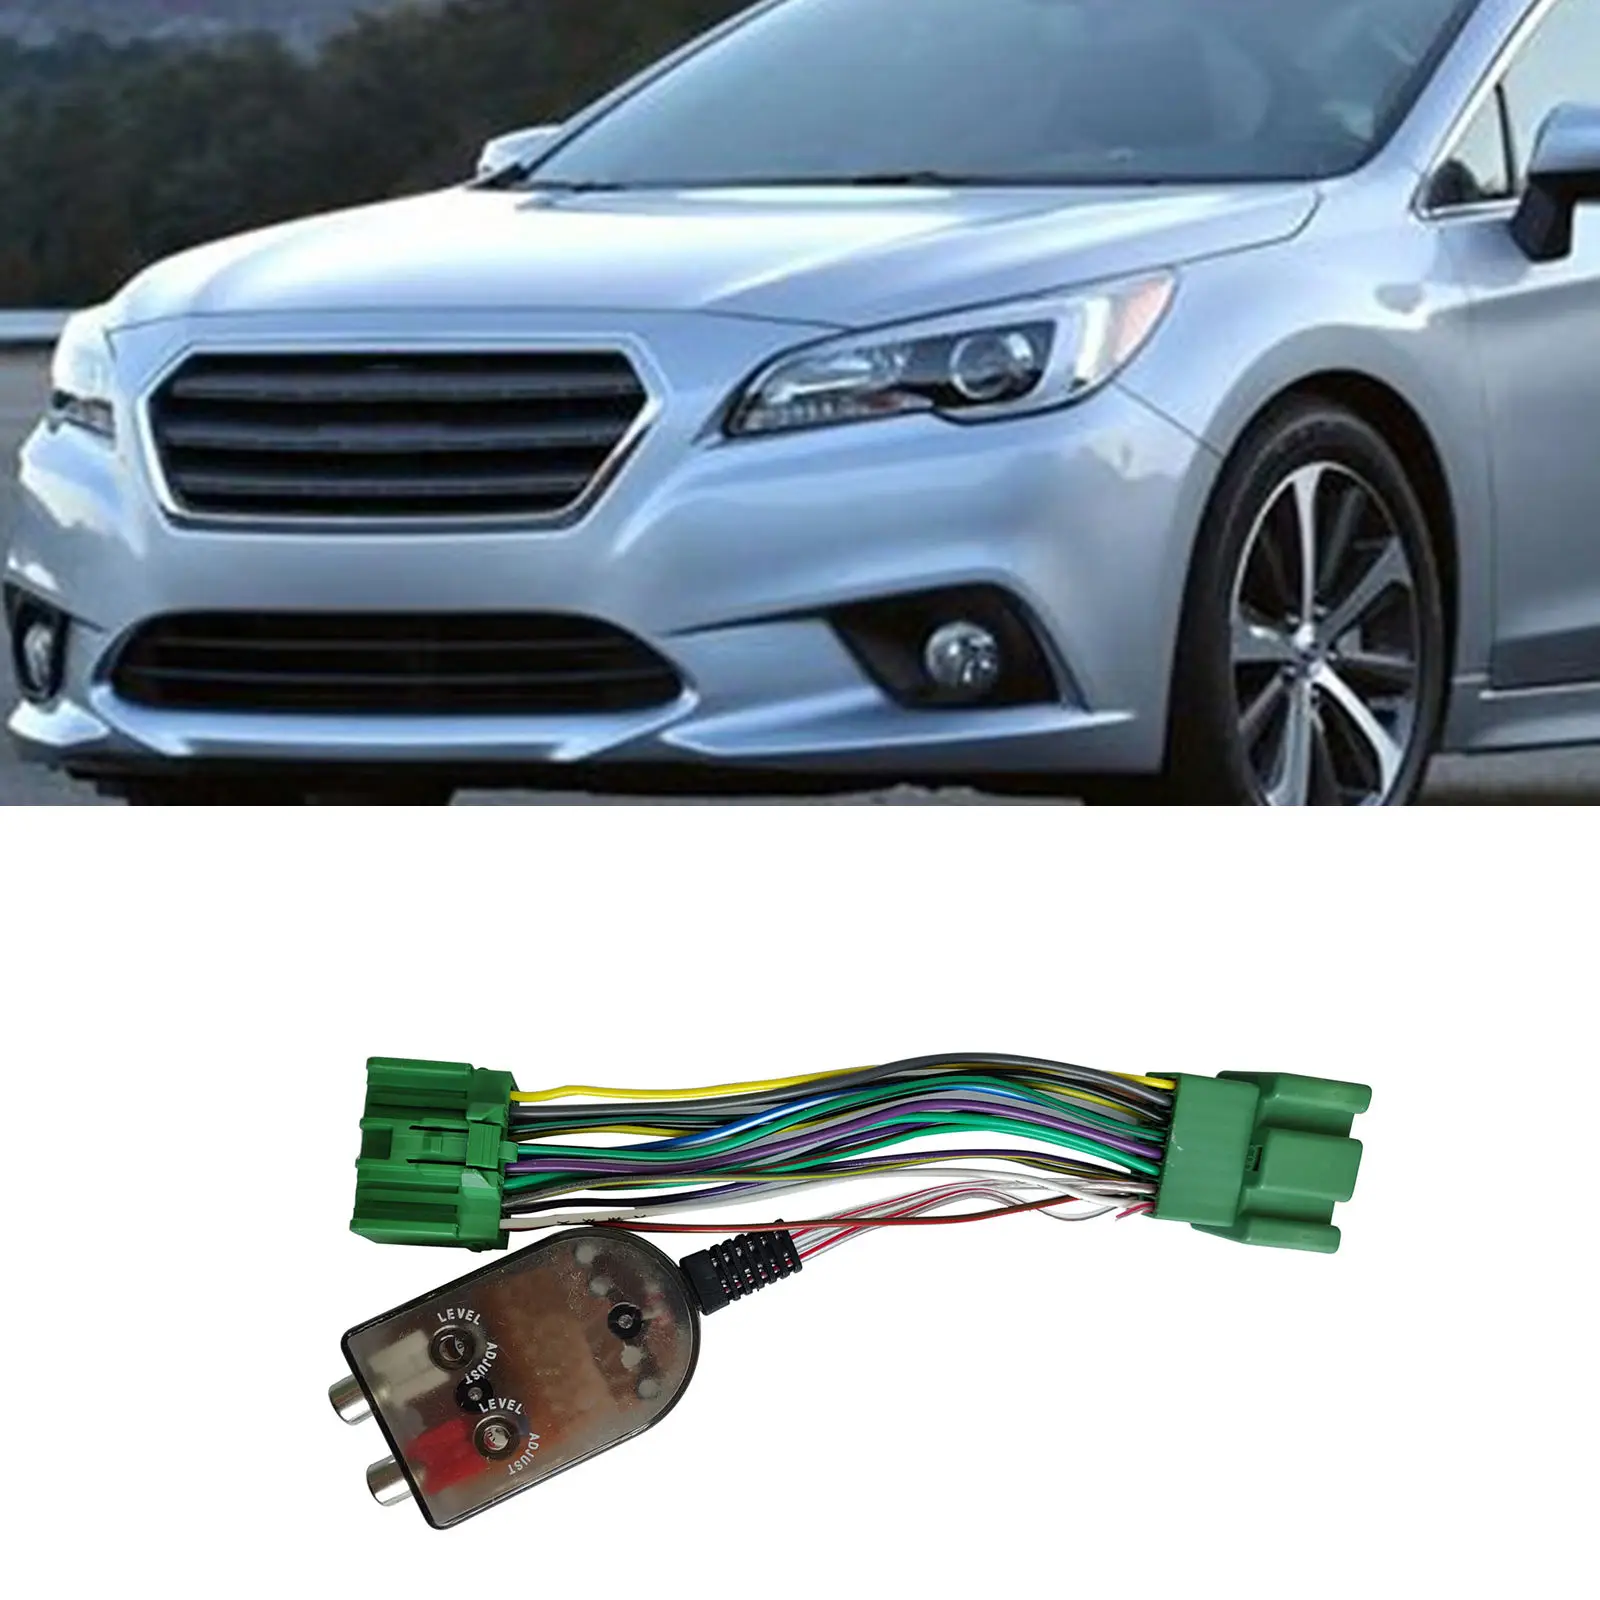 Add An Amplifier Radio Adapter Interface Radio Wiring Harness for Chevy for GMC Sierra 14-19 Car Installation Equipment